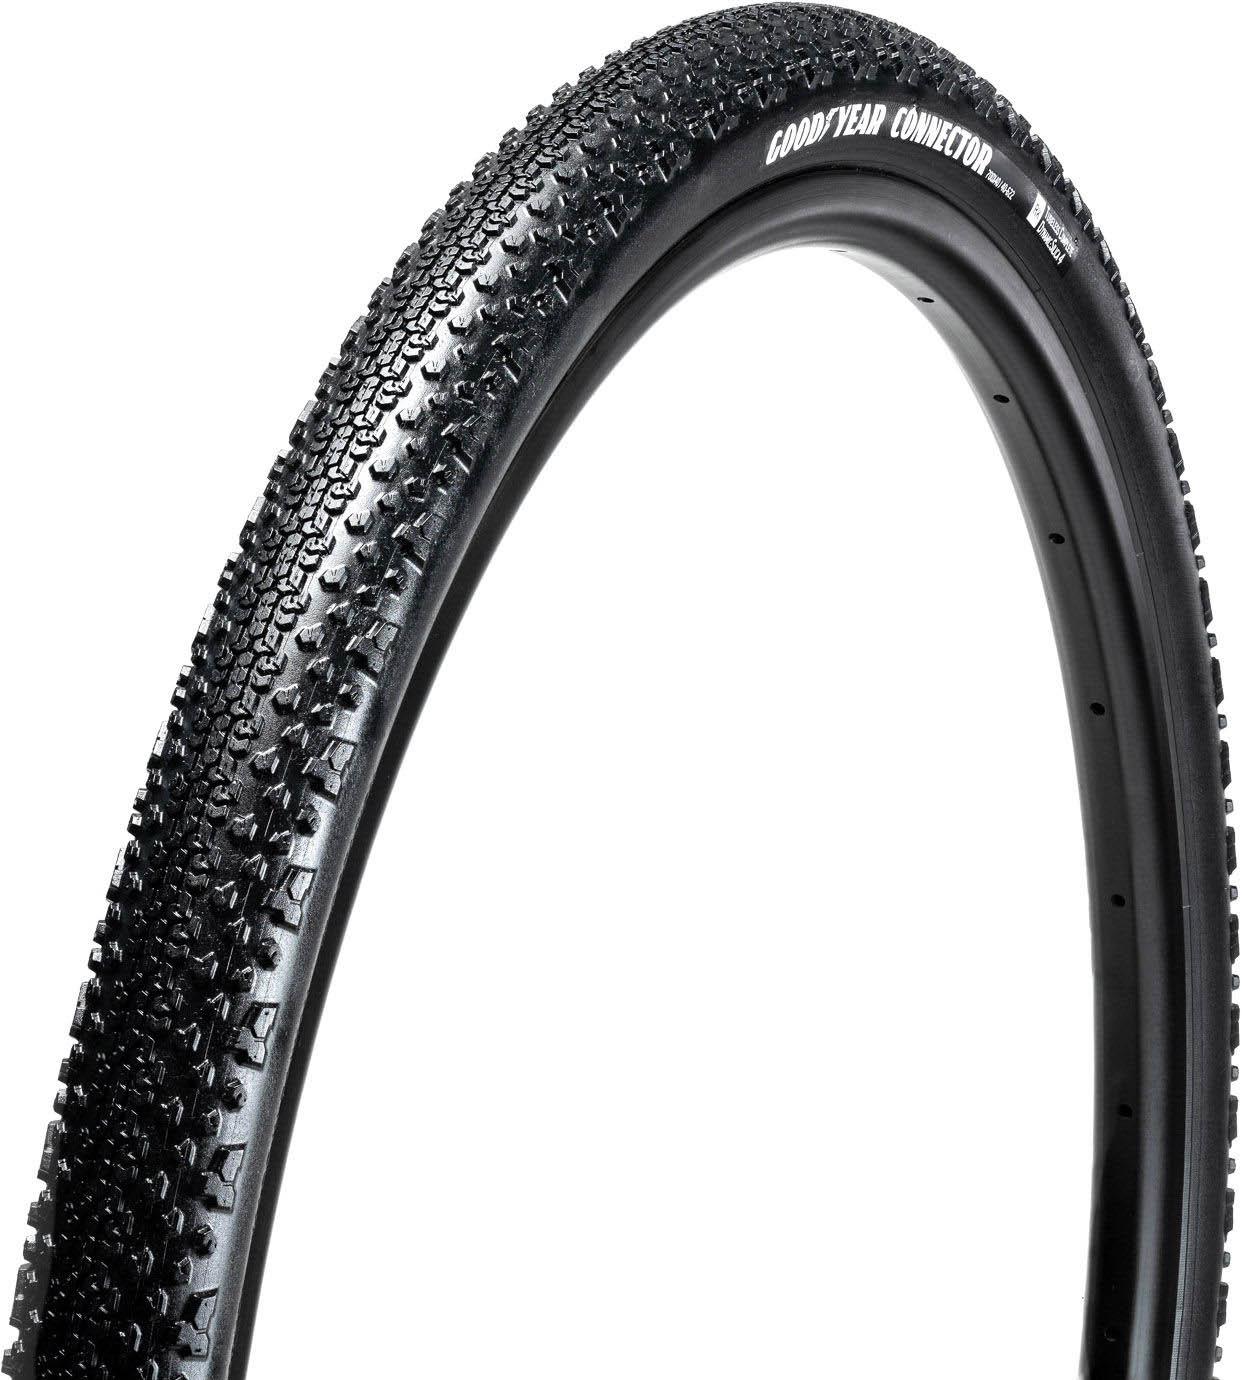 Goodyear Connector Tubeless Cyclocross Tyre - Black/tan Wall